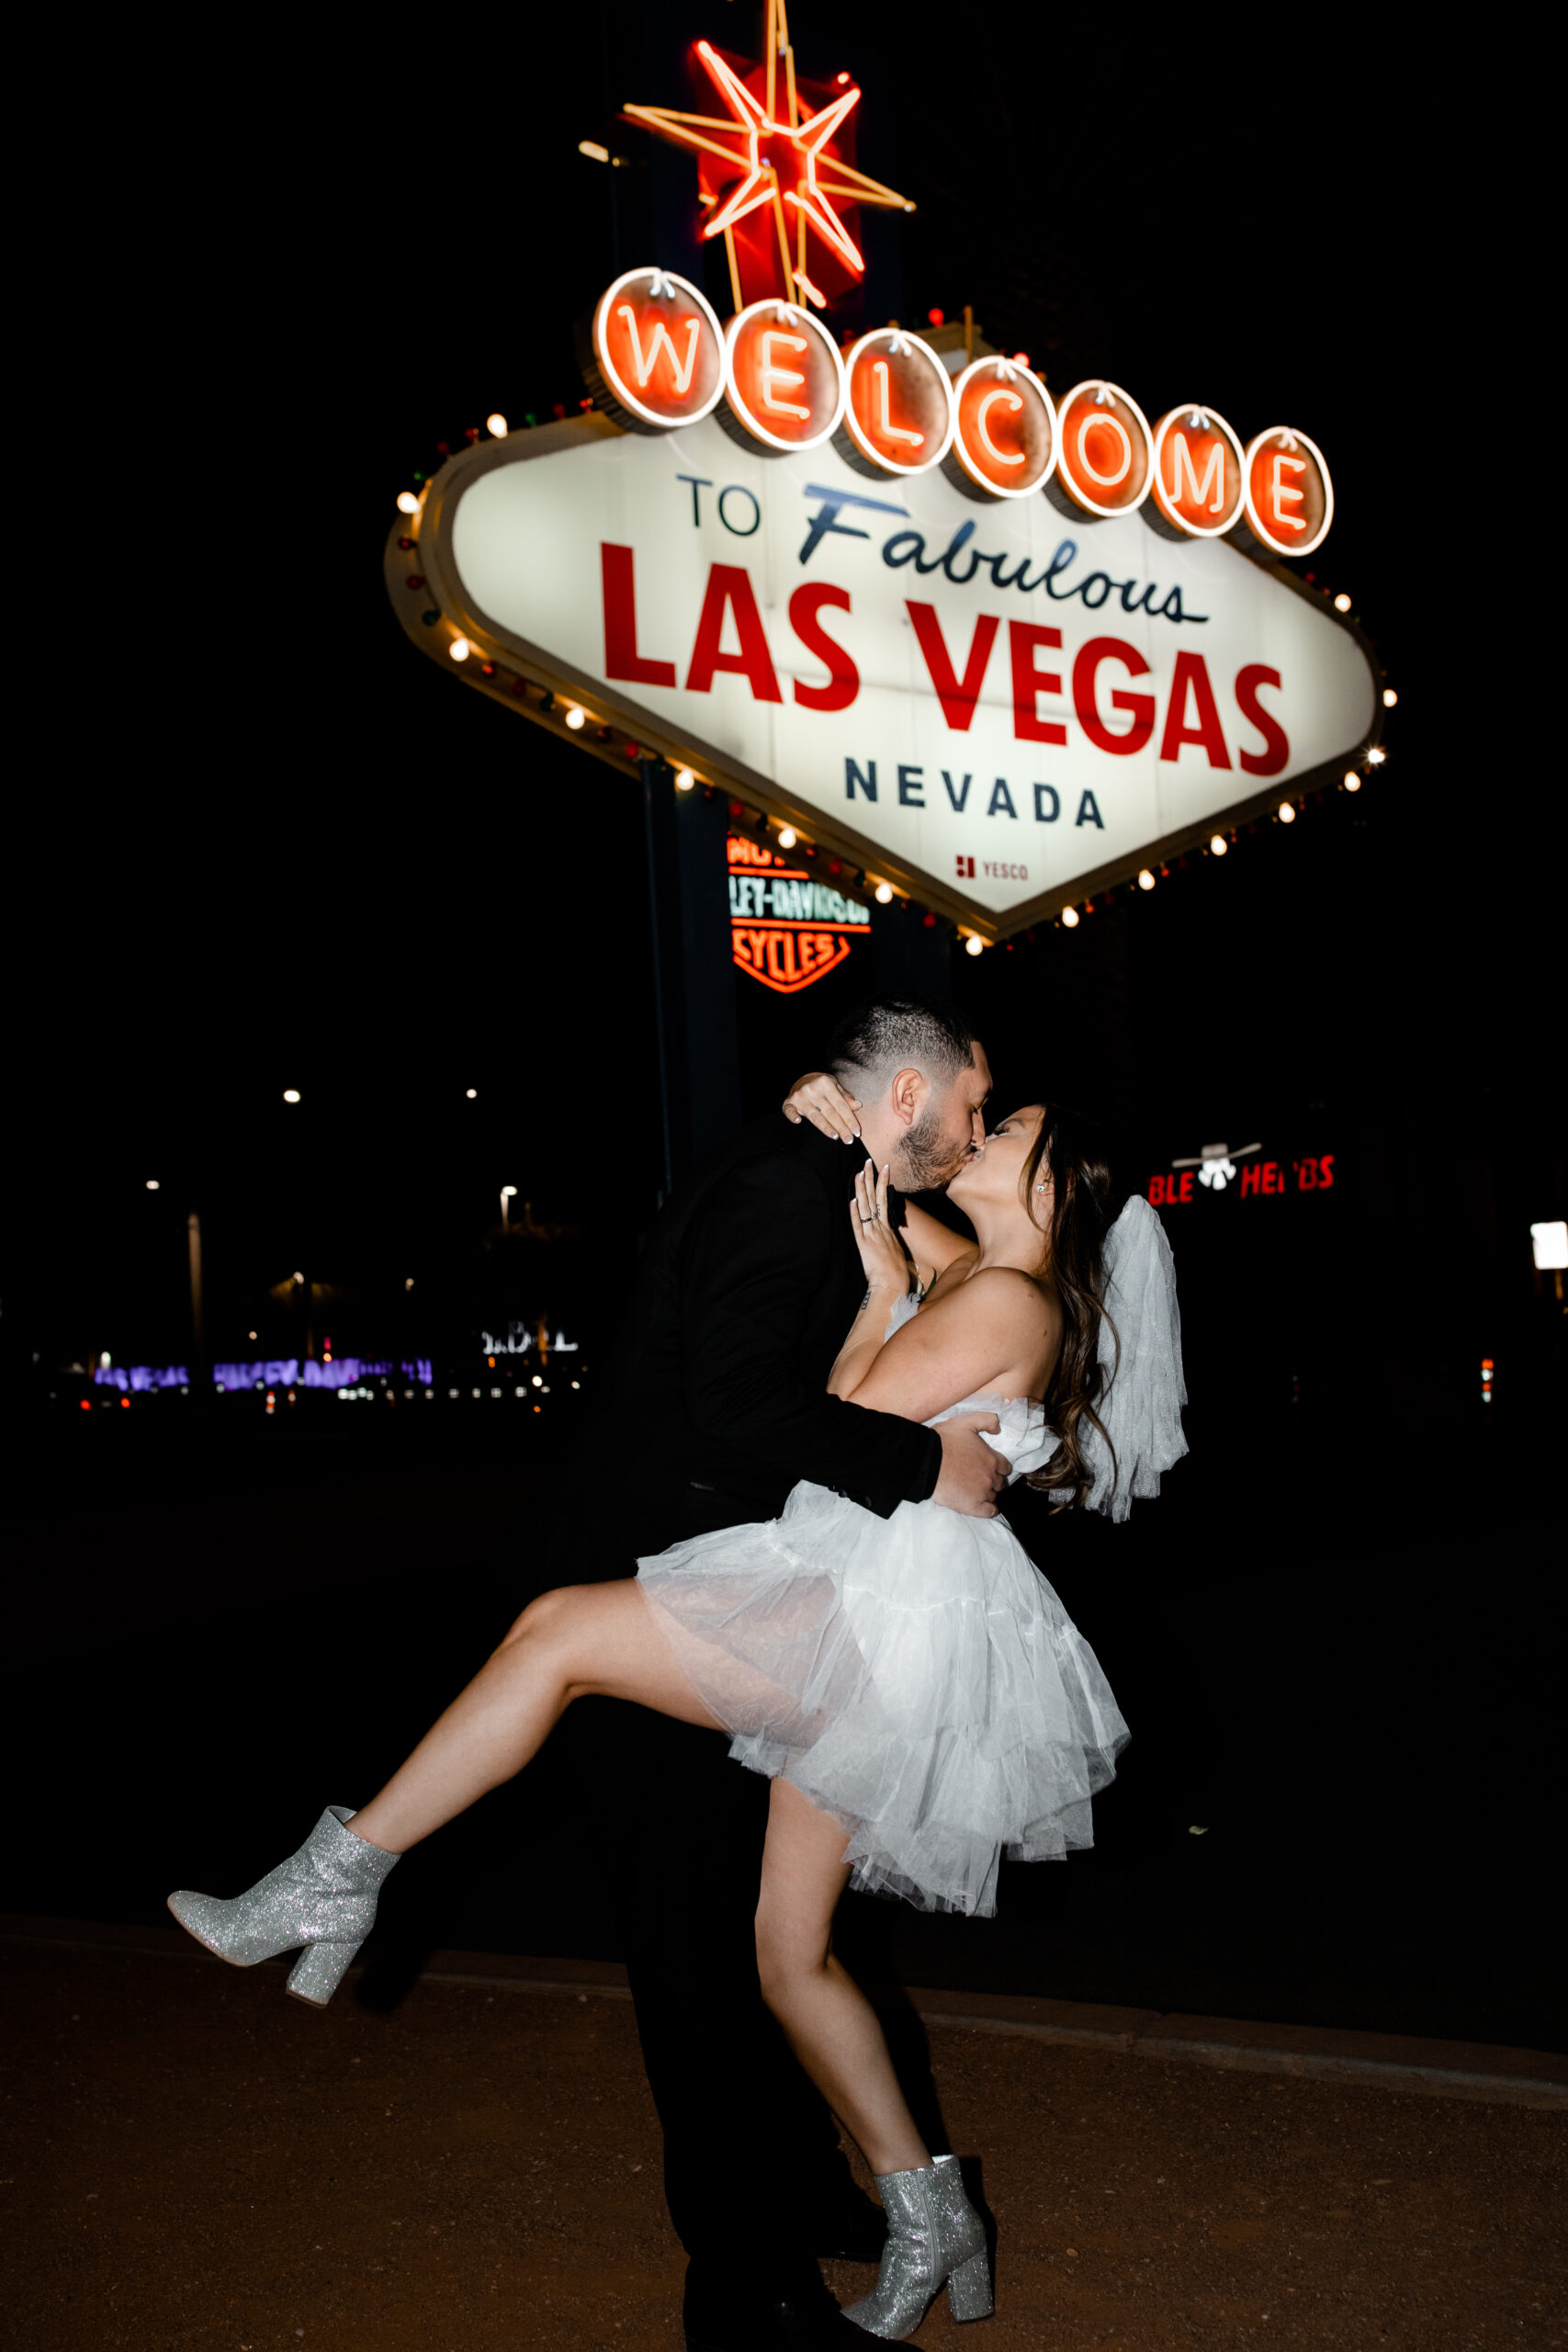 An elopement photoshoot at the Welcome to Las Vegas sign